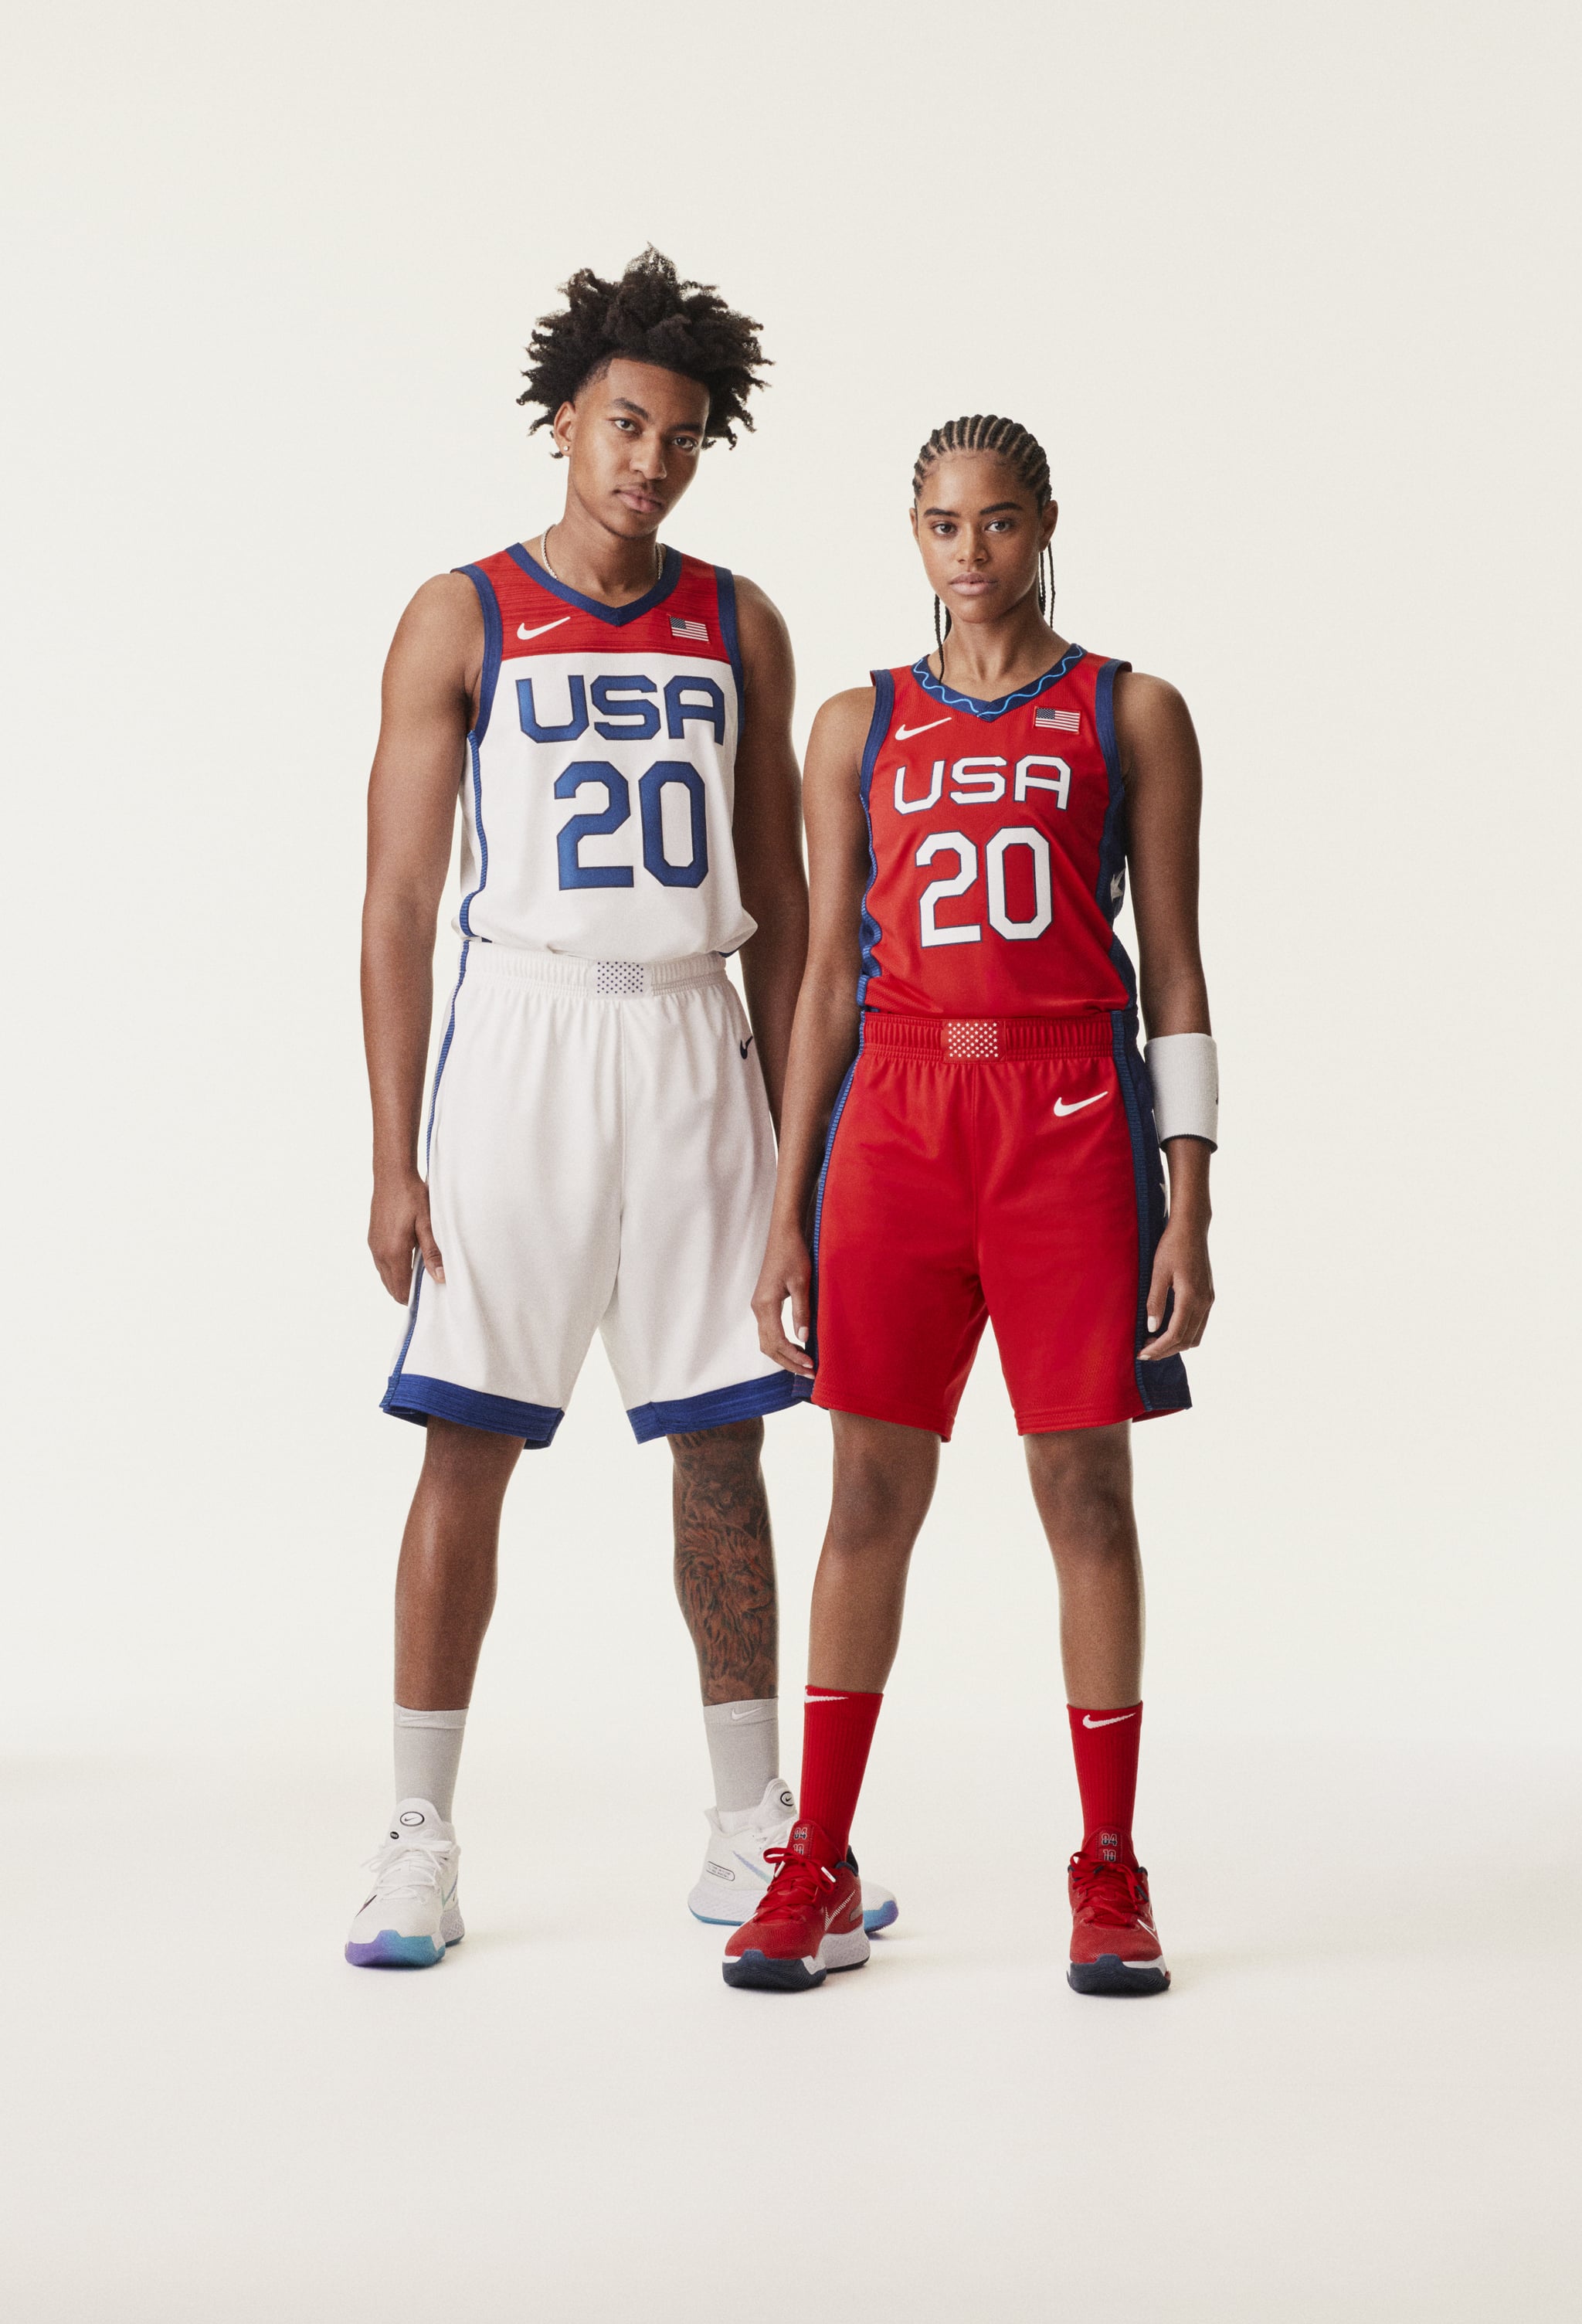 Get A First Look At The Team Usa S 21 Olympic Uniforms Popsugar Fitness